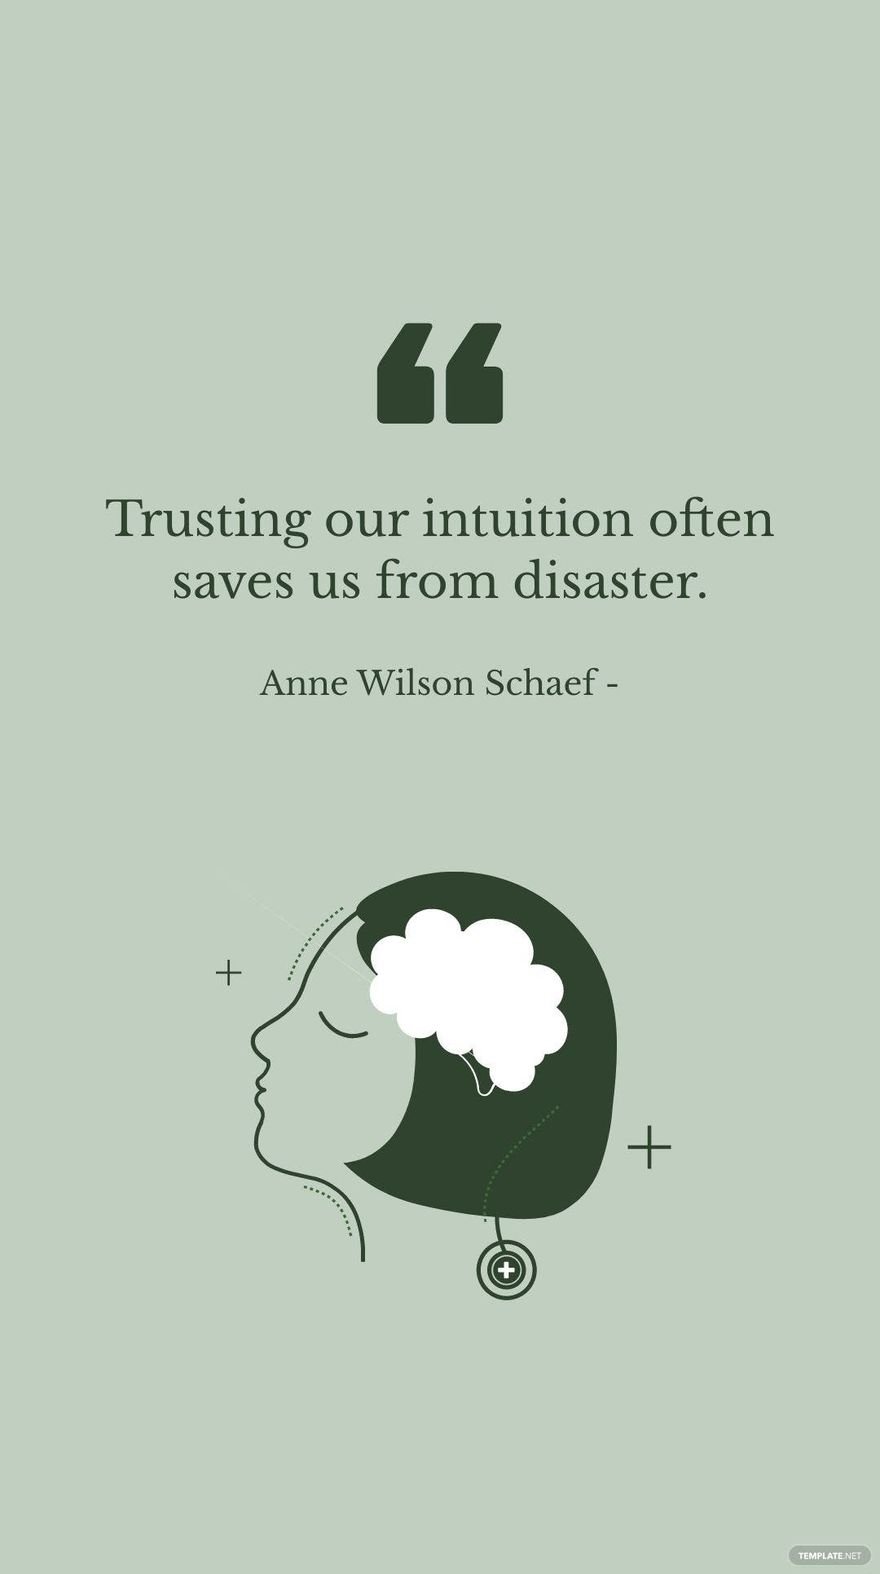 Free Anne Wilson Schaef - Trusting our intuition often saves us from disaster. in JPG